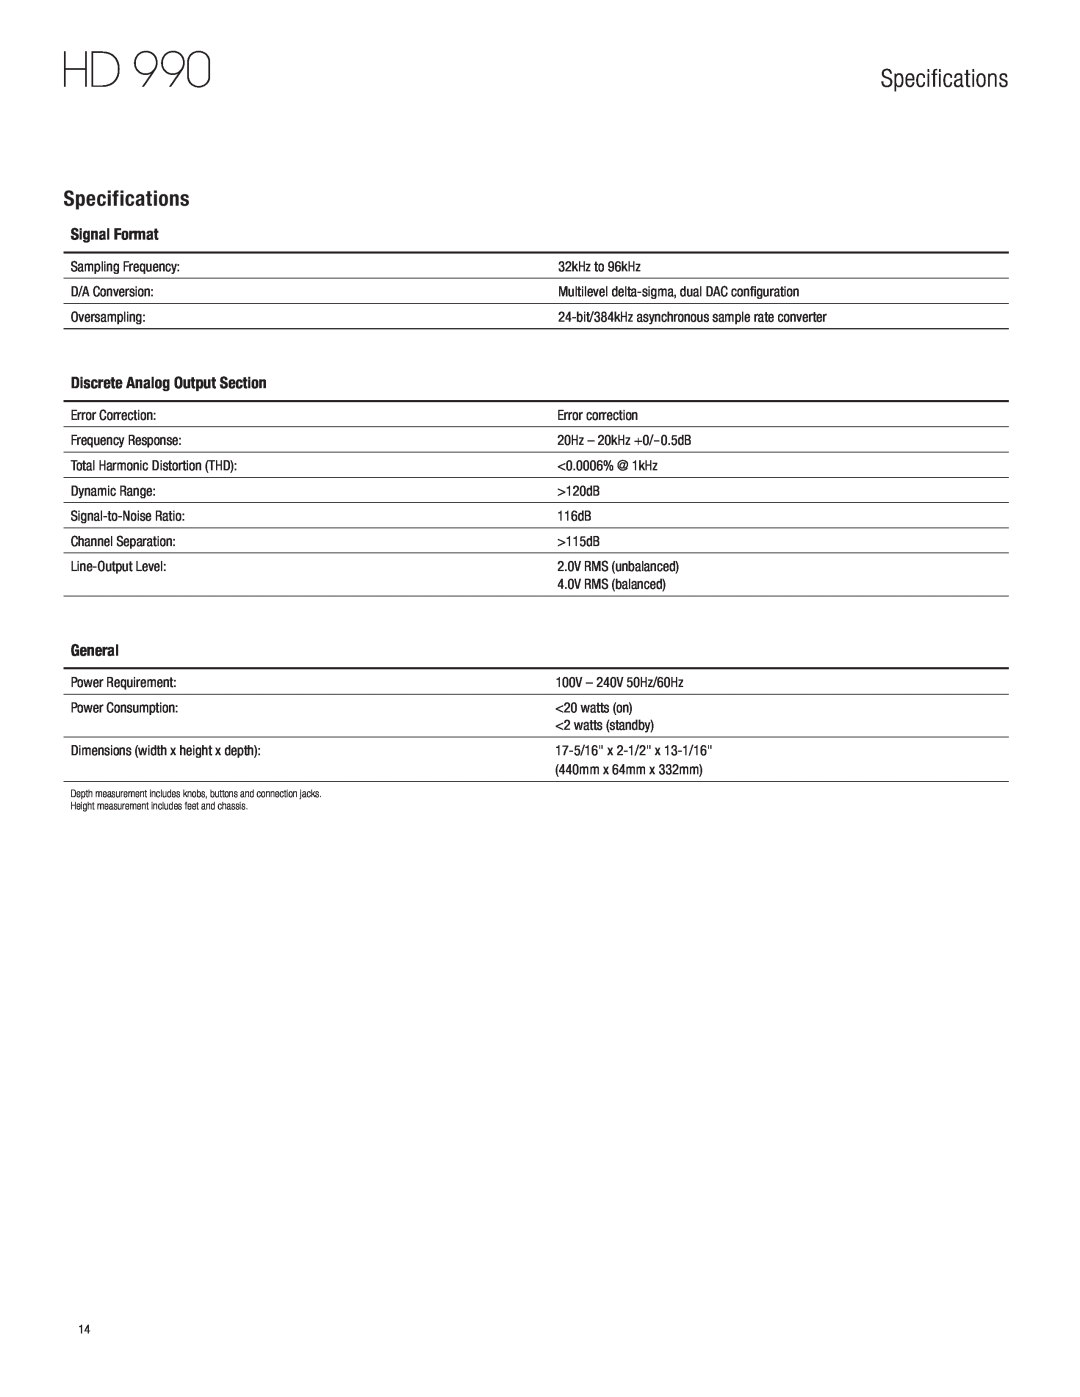 Harman-Kardon HD 990 owner manual Specifications, Signal Format, Discrete Analog Output Section, General 